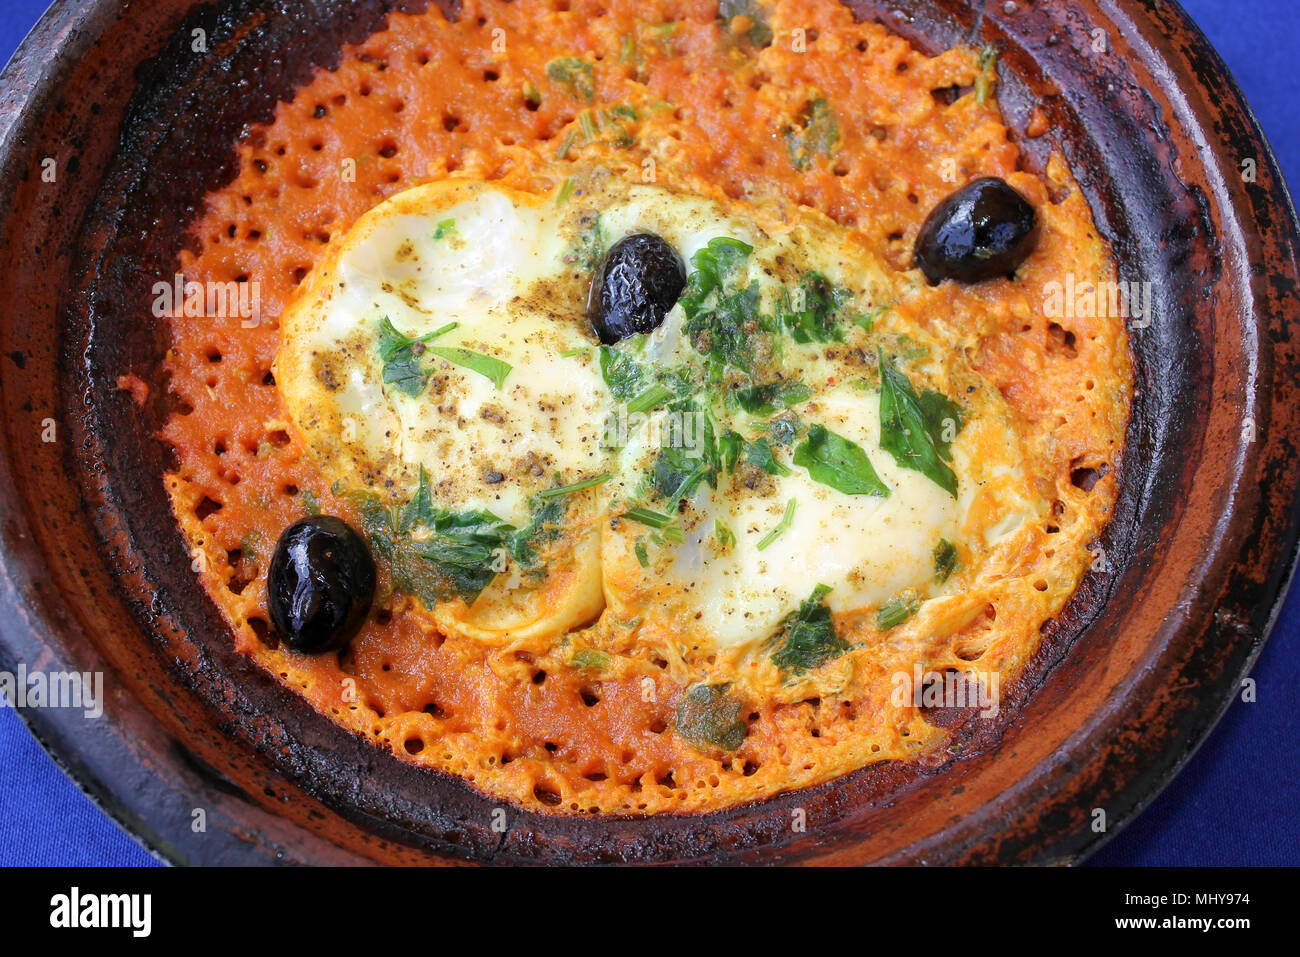 Moroccan Berber Omelette a.k.a Shakshuka comprising Eggs, Tomatoes, Black Olives and seasoning Stock Photo